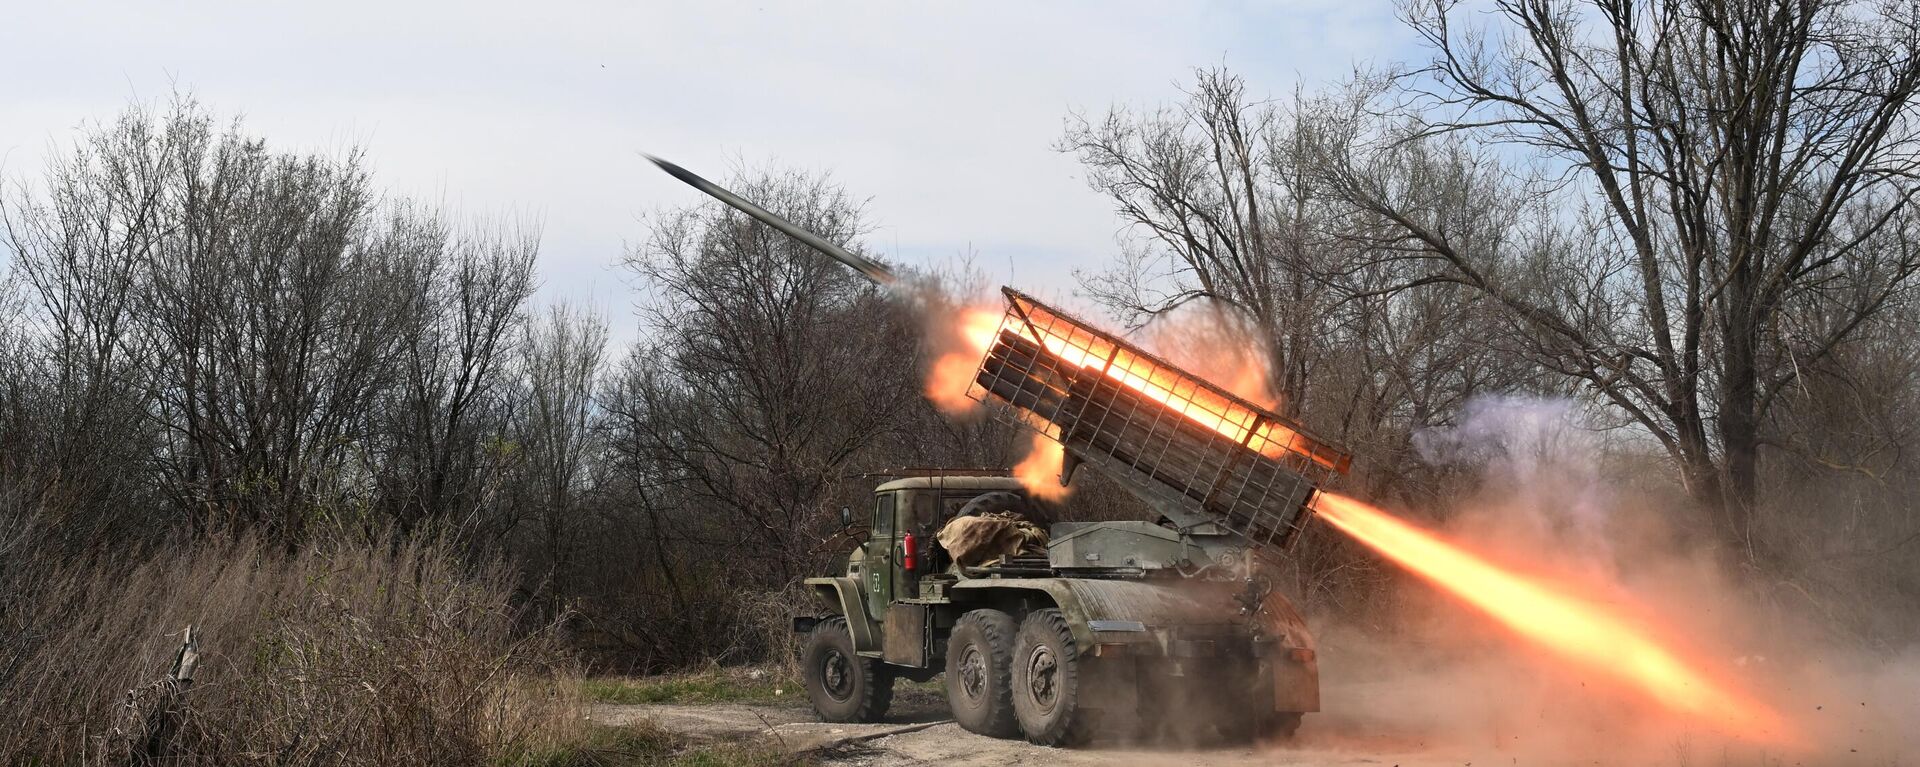 The Grad multiple launch rocket system (MLRS) of the Southern Battlegroup fires at positions of the Ukrainian troops in the zone of the special military operation. - Sputnik International, 1920, 02.05.2024